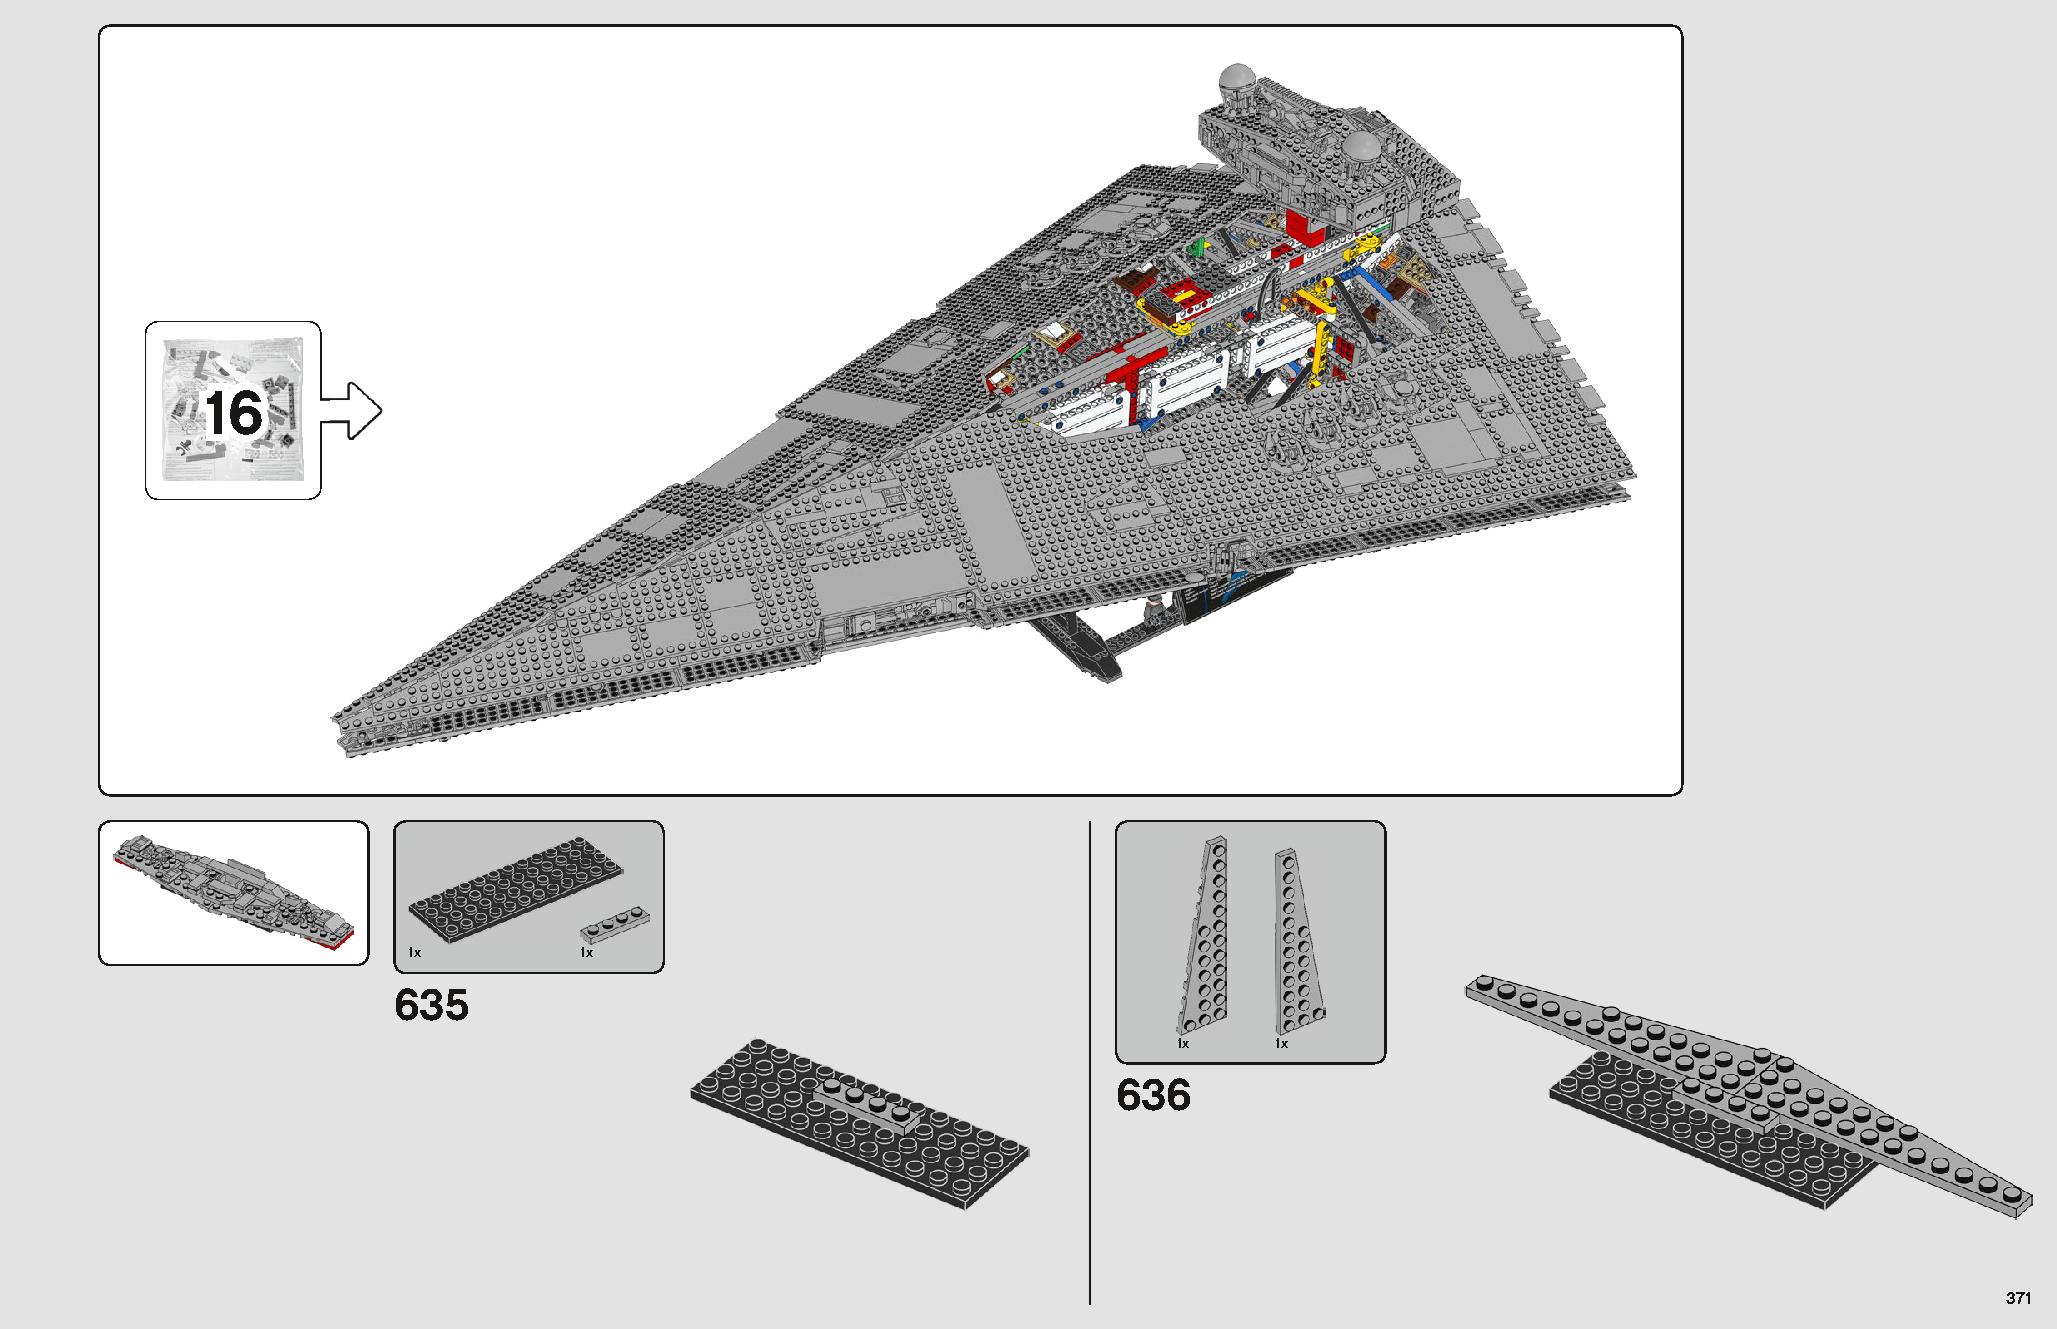 Imperial Star Destroyer 75252 レゴの商品情報 レゴの説明書・組立方法 371 page